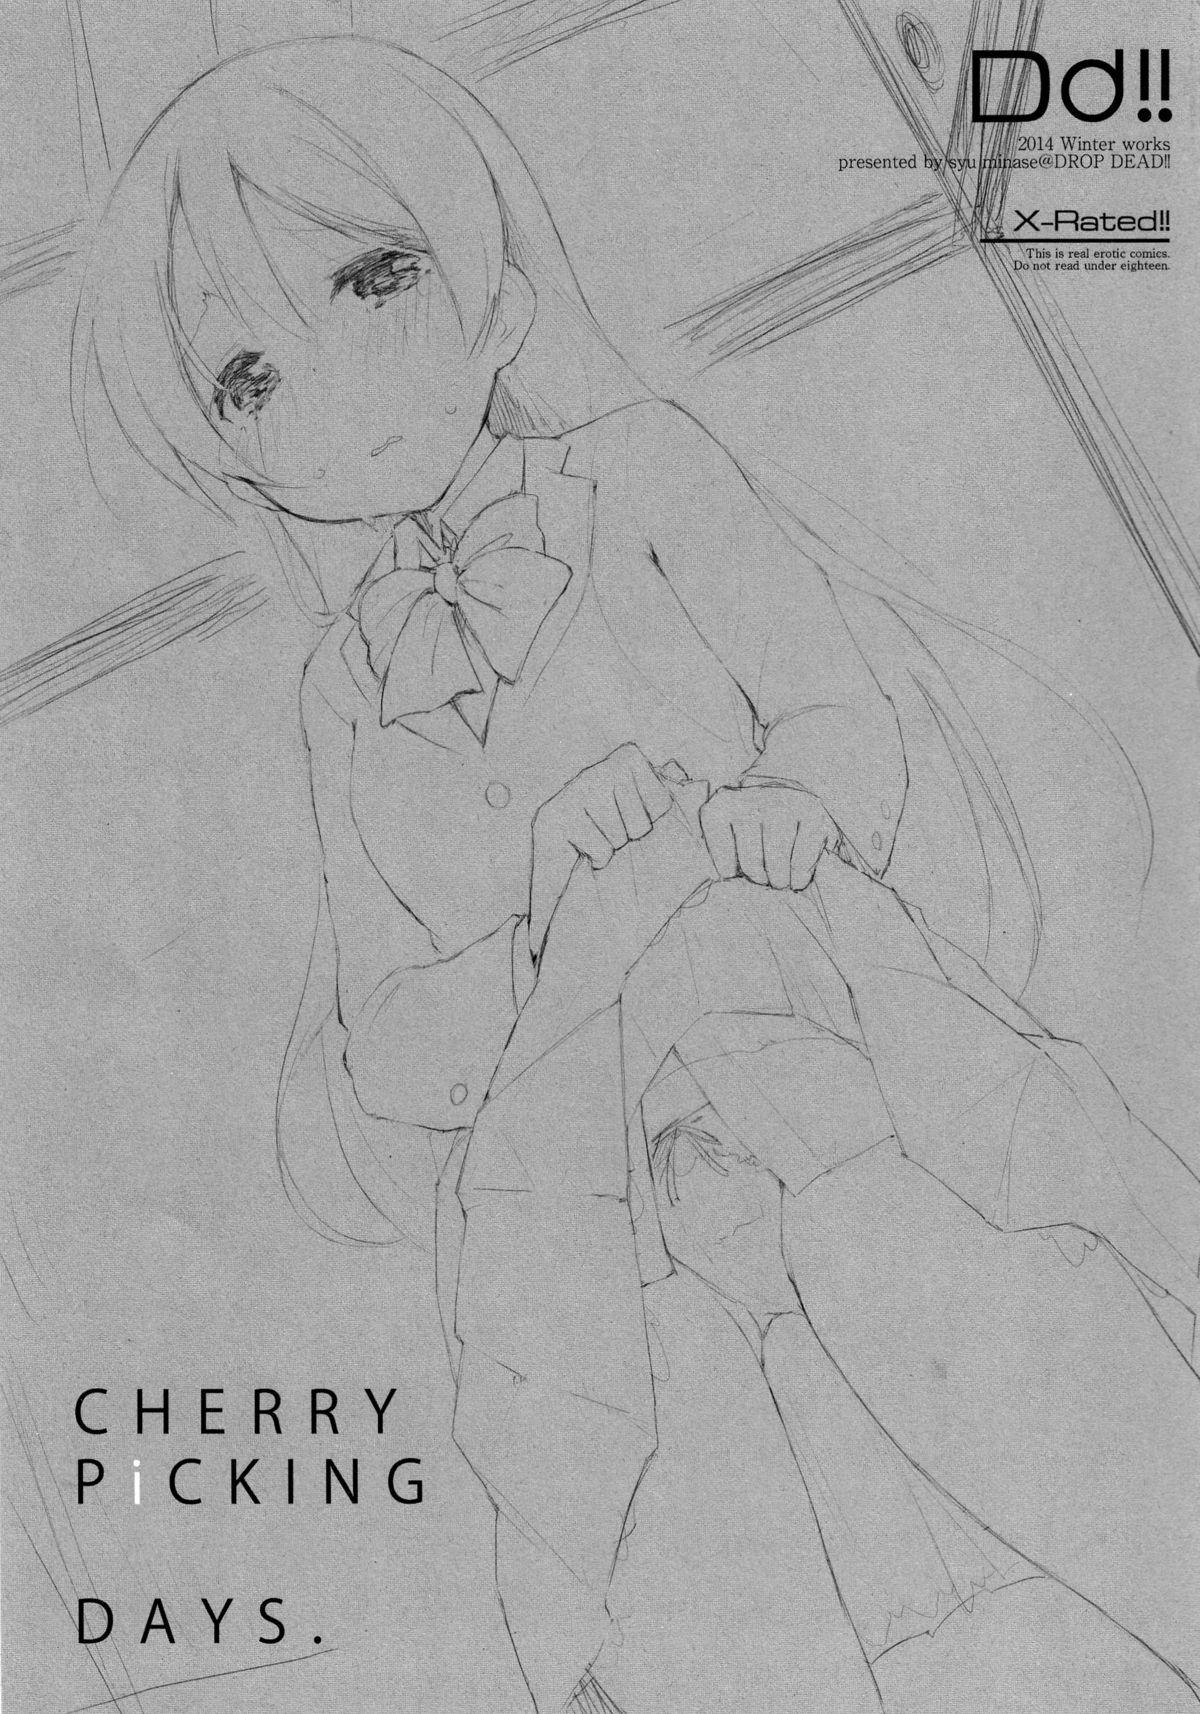 Blacksonboys CHERRY PiCKING DAYS - Love live Russian - Page 3